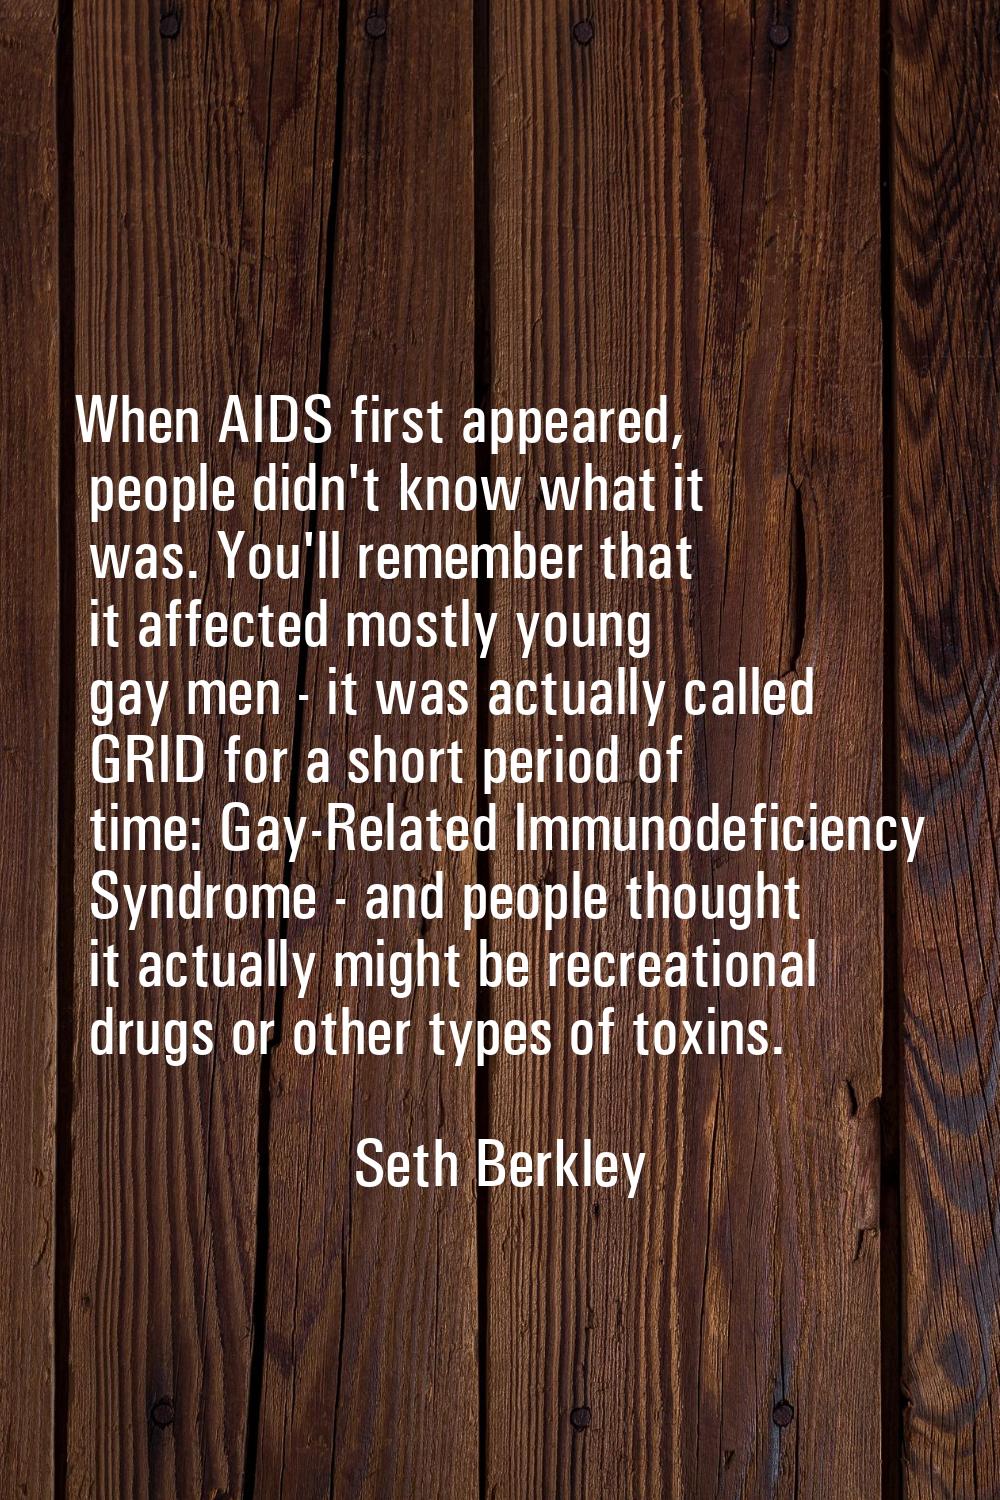 When AIDS first appeared, people didn't know what it was. You'll remember that it affected mostly y